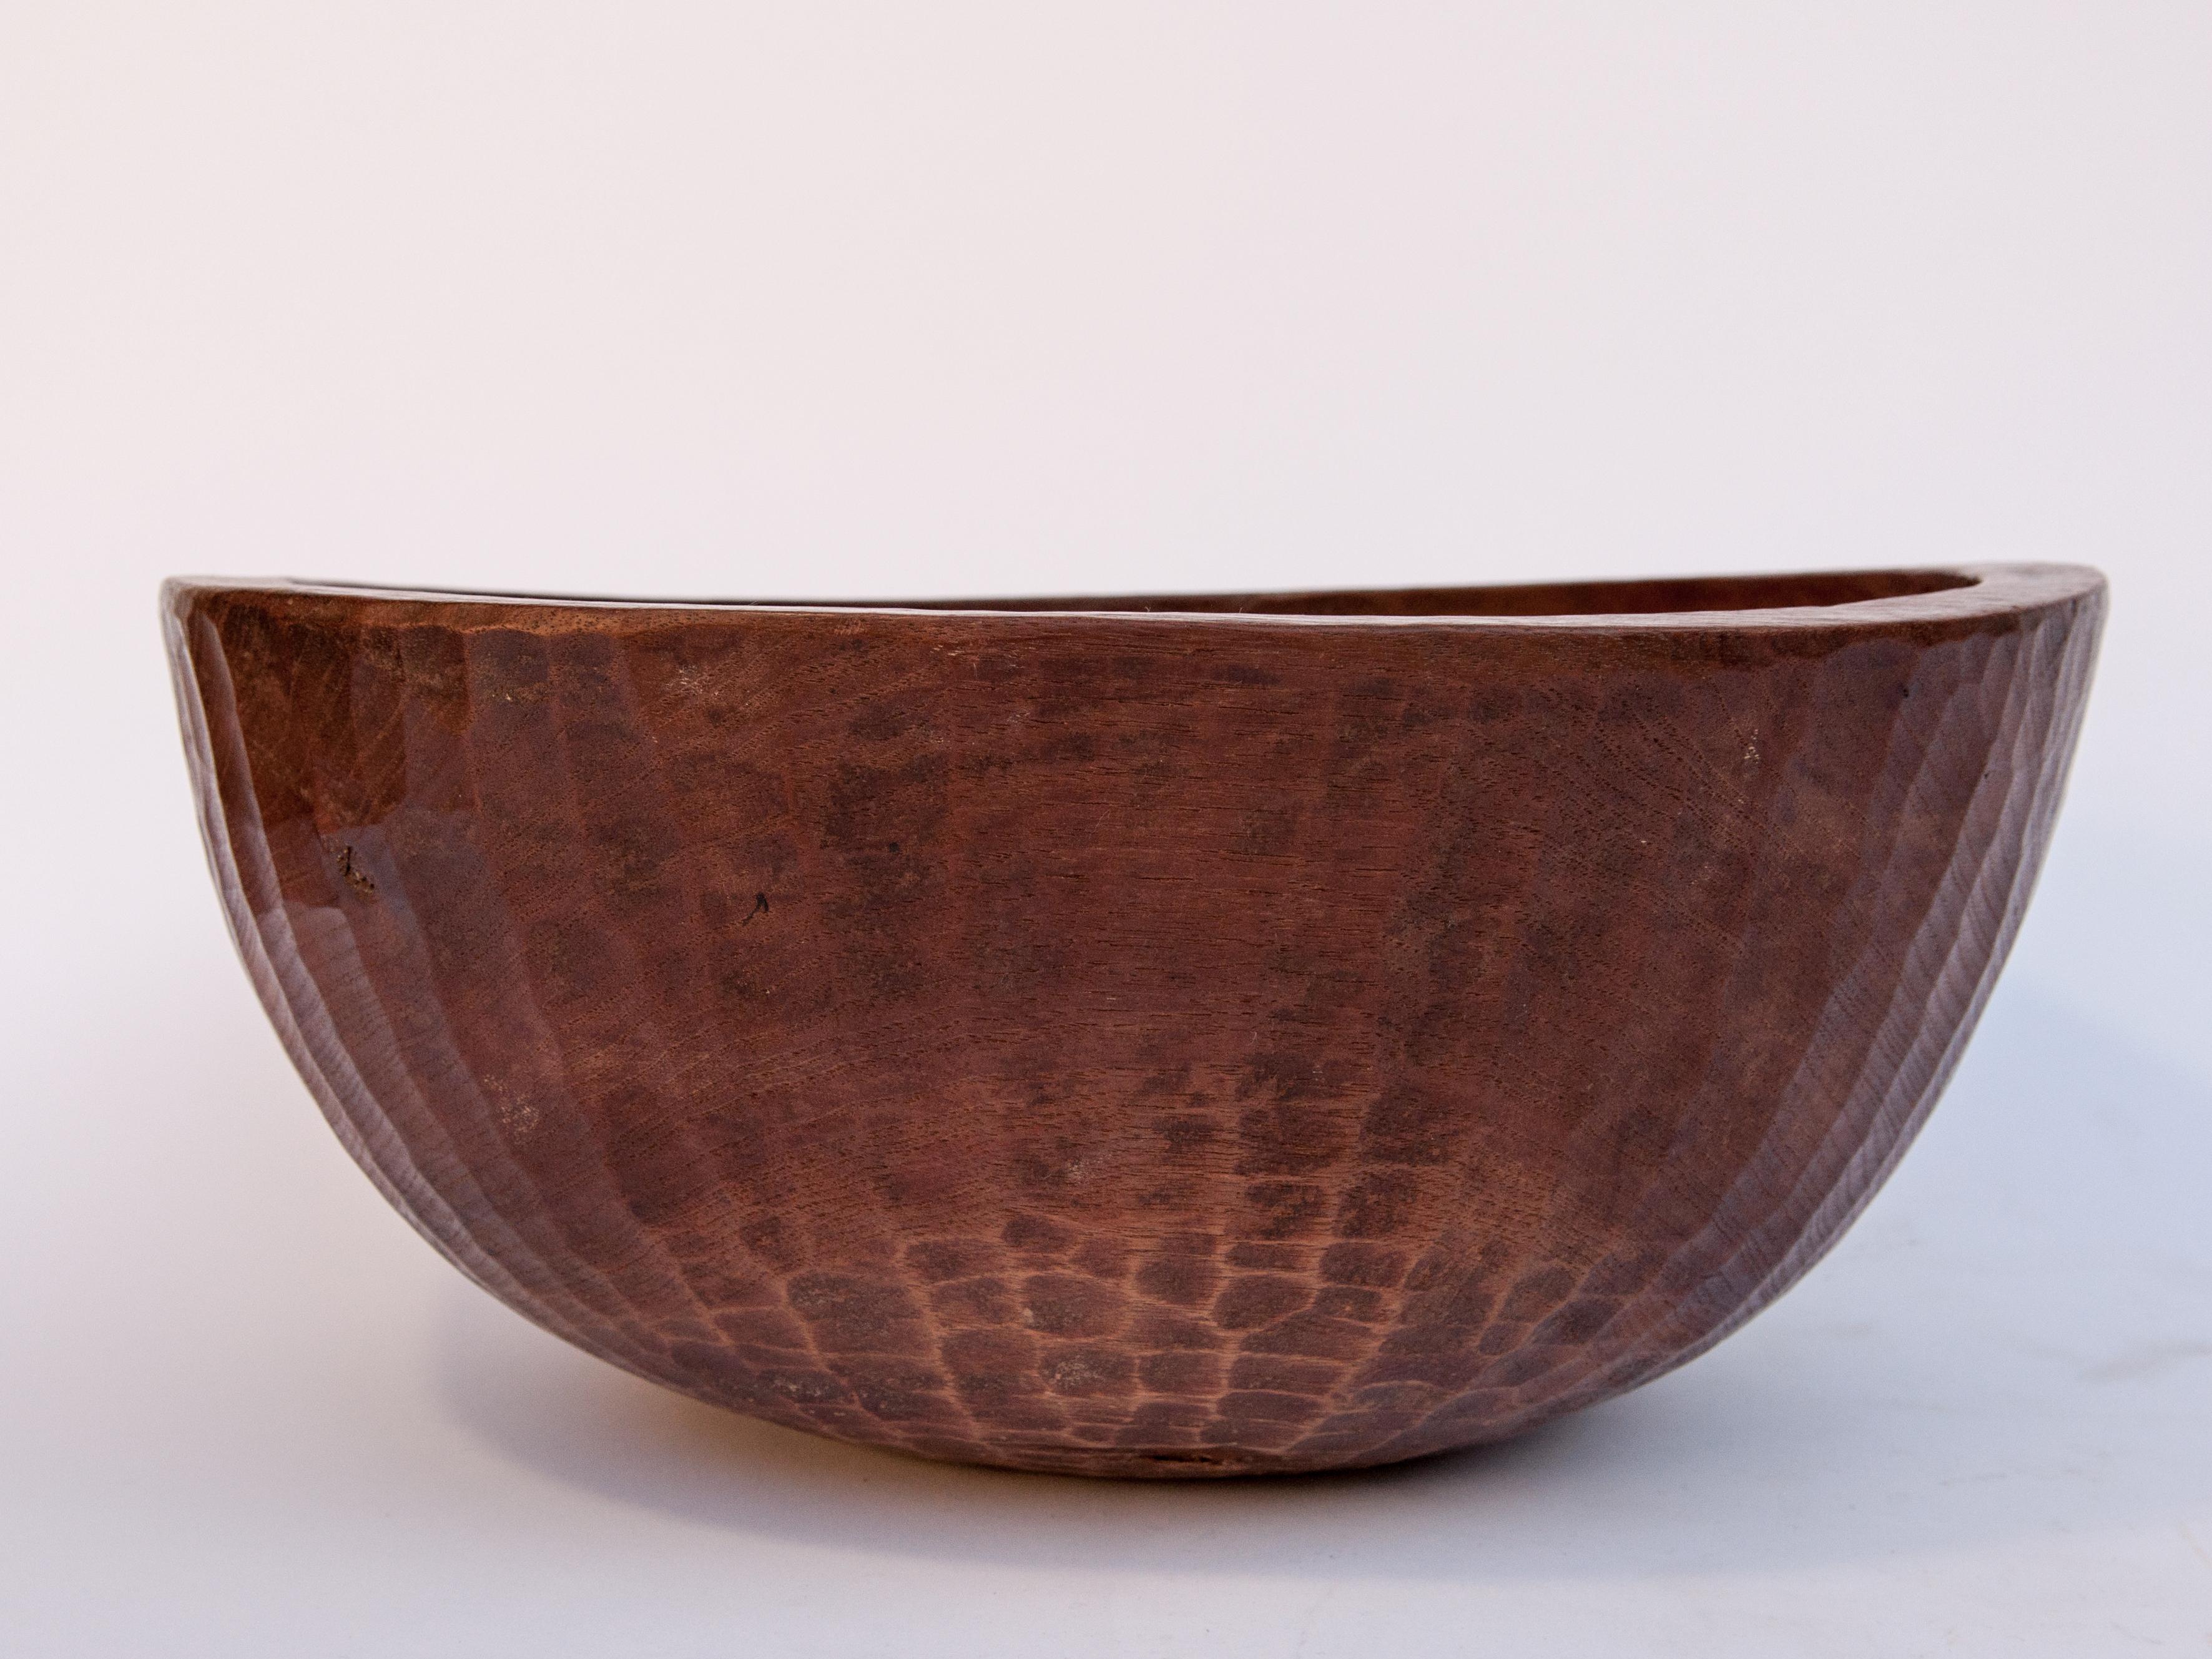 Old tribal wooden bowl from West Nepal Himal, 14.25 inch diameter, mid-20th century
This bowl is hand hewn from a single piece of local wood. It has a rich patina, a lovely grain pattern in the wood, and the hand adzed shaping of the bowl has given